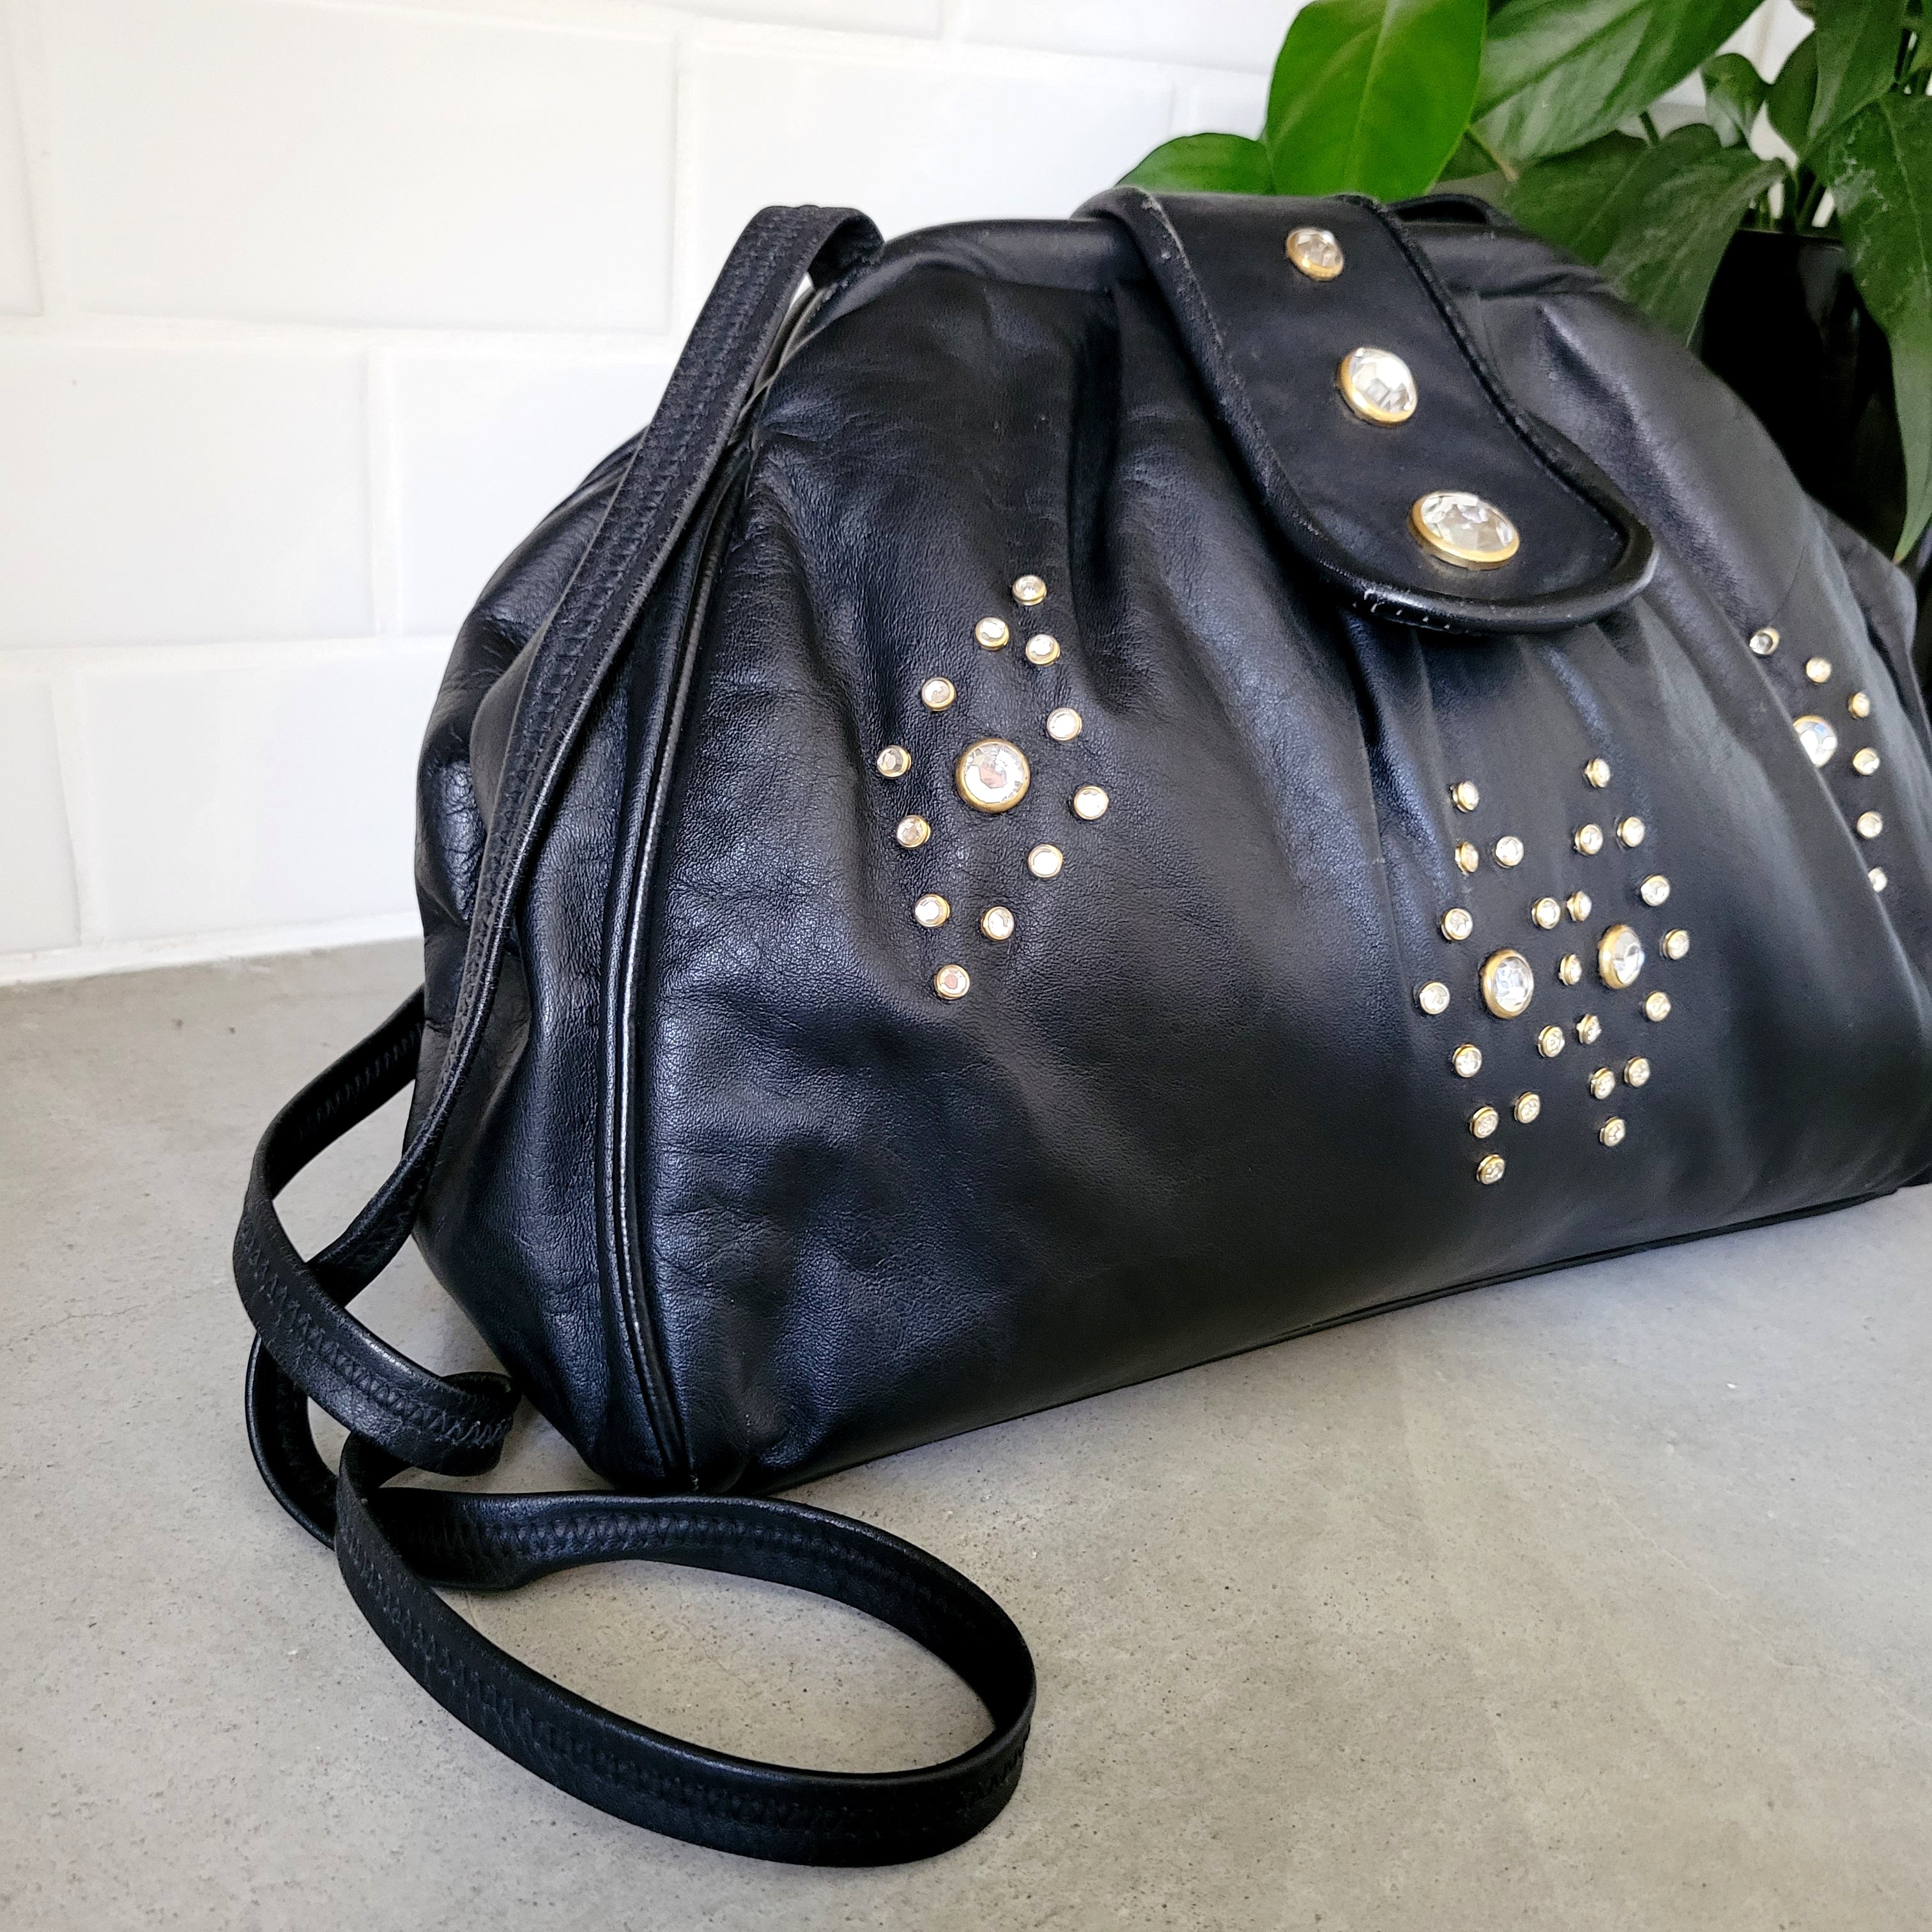 Buy Studded Shoulder Bag for Women Leather Punk Style Rock Rivet Crossbody Bag  Handbag with Chain Wallet Purse for Girls, Black, 18.5X15CM at Amazon.in